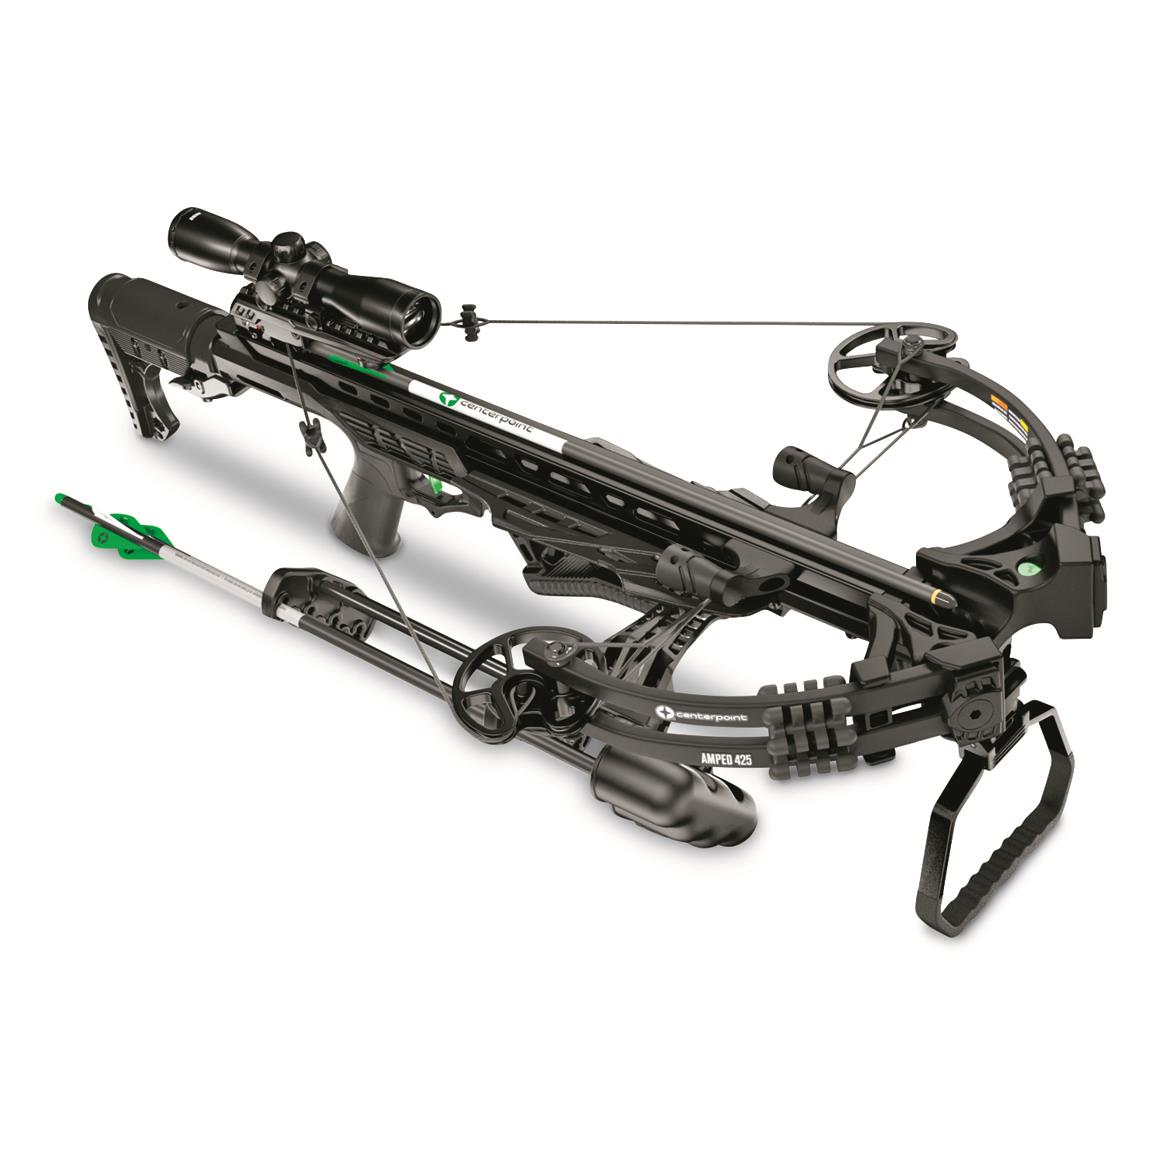 CenterPoint Amped 425 Crossbow with Silent Cranking Device